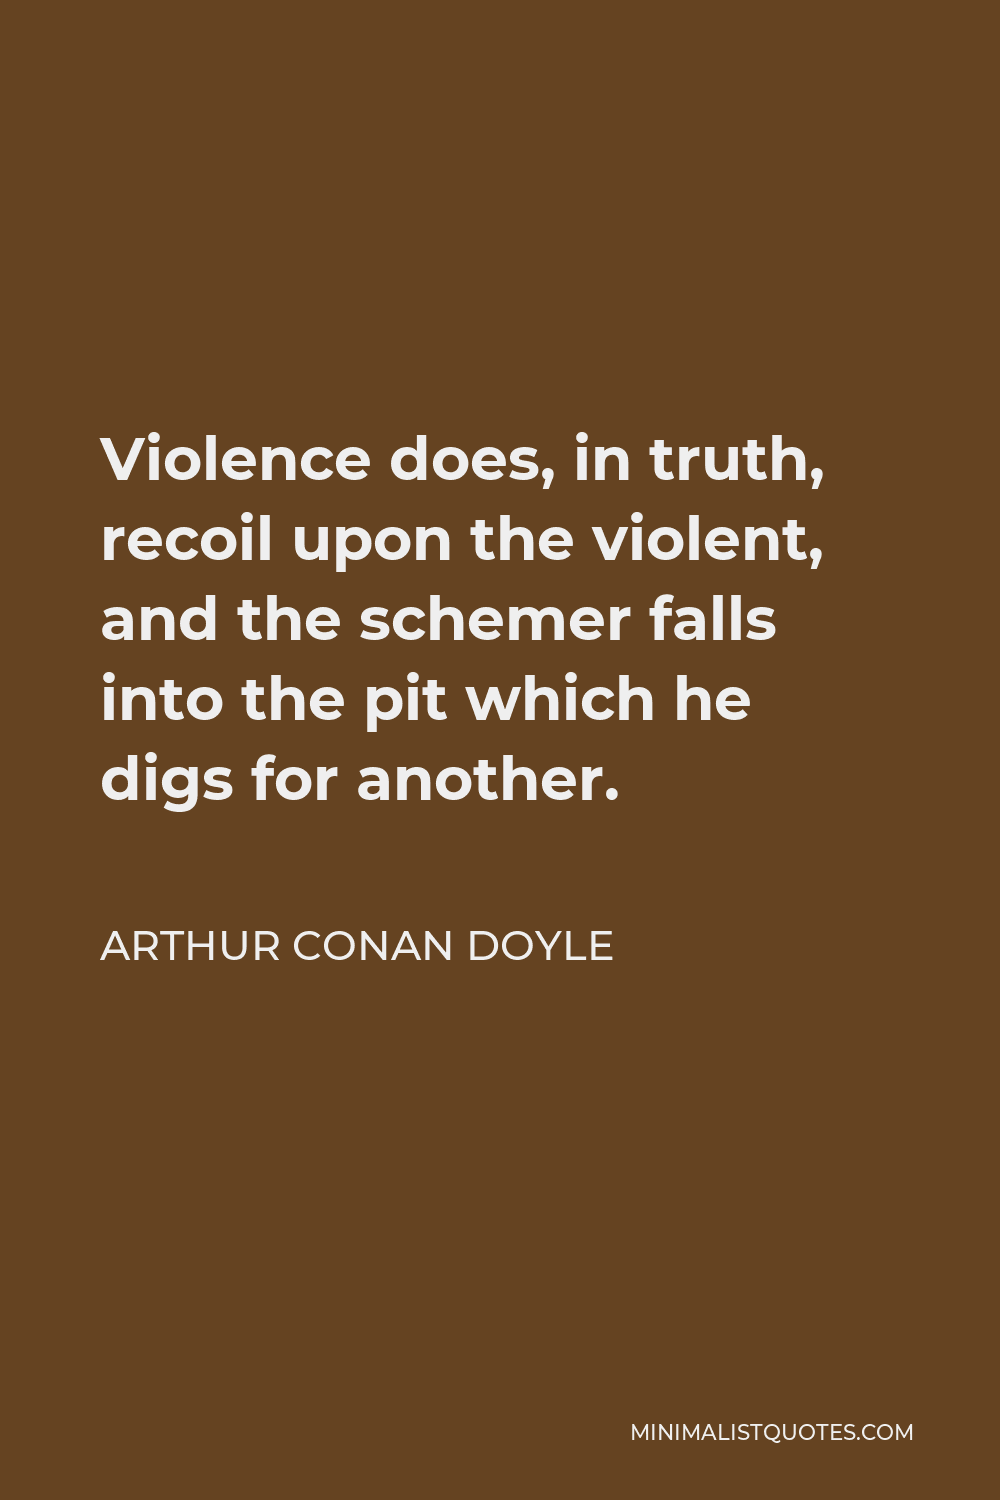 Arthur Conan Doyle Quote - Violence does, in truth, recoil upon the violent, and the schemer falls into the pit which he digs for another.